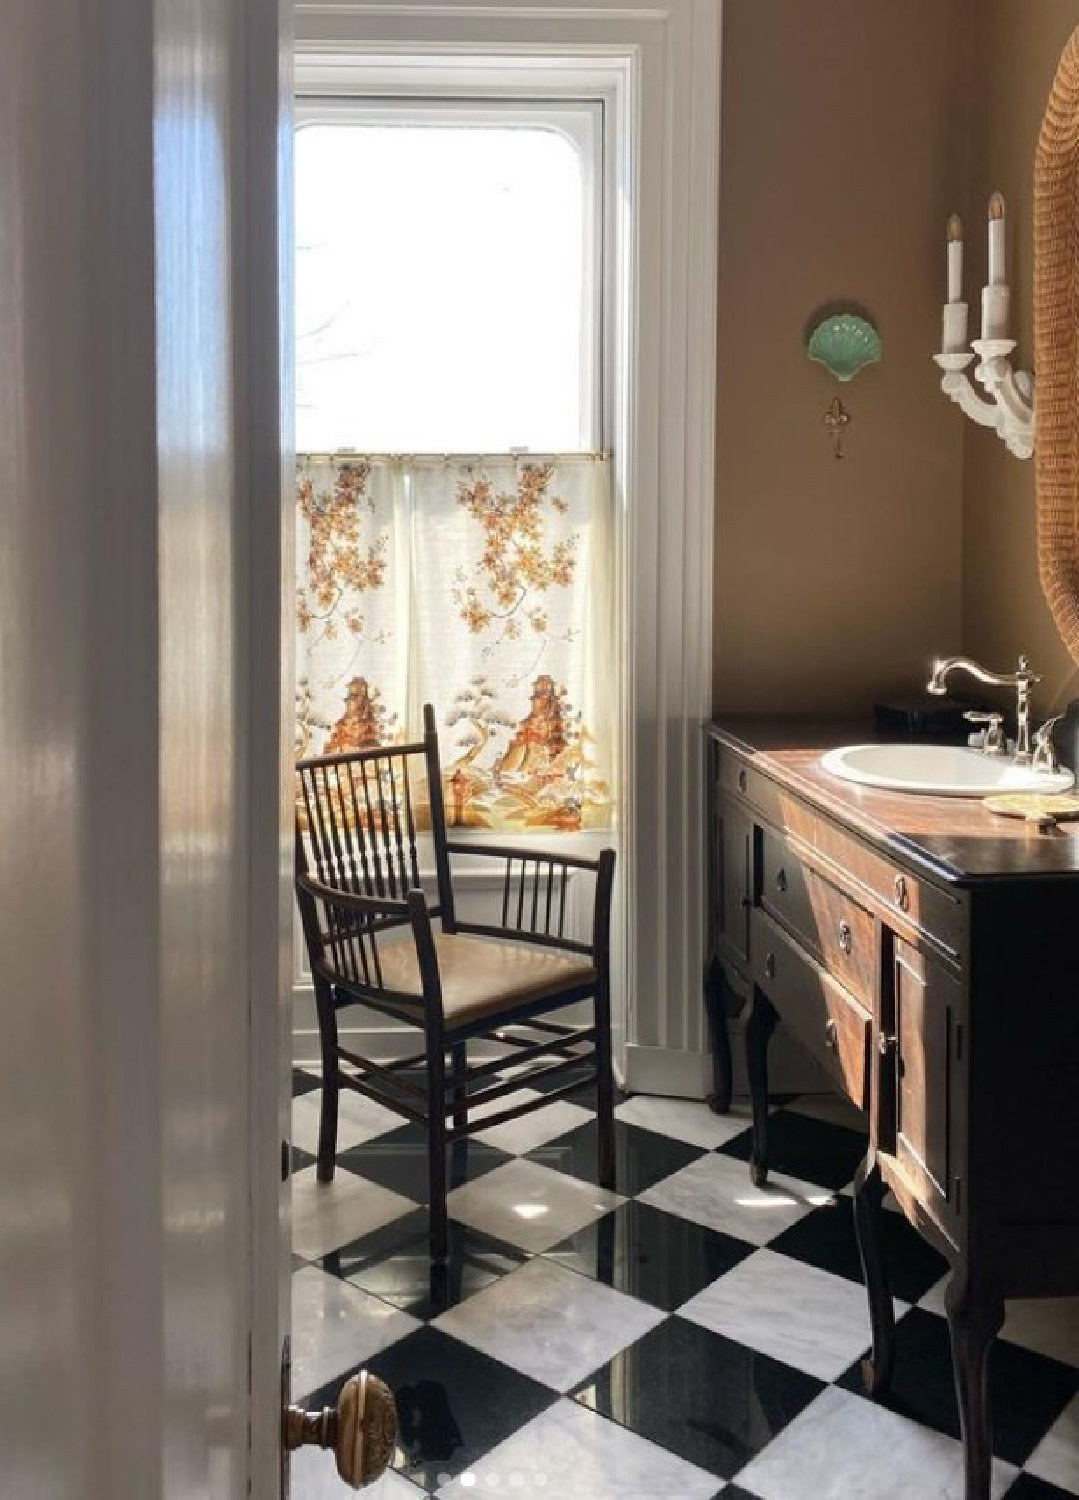 Sherwin Williams Pure White on trim in a lovely timeless bath with checkered floor - @via110design. #sherwinwilliamspurewhite